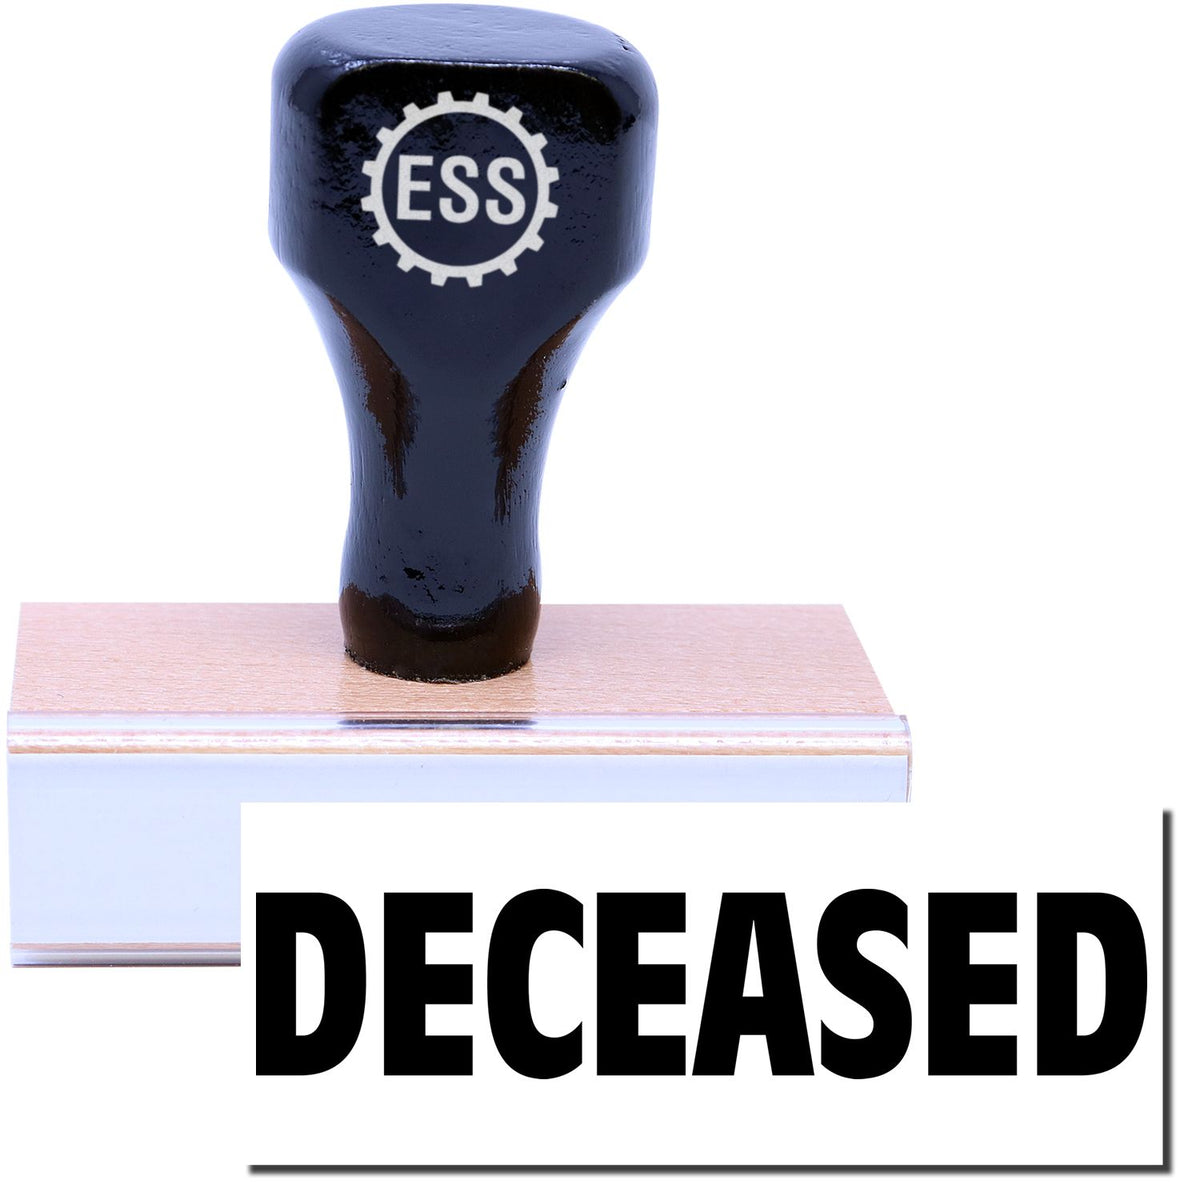 A stock office rubber stamp with a stamped image showing how the text &quot;DECEASED&quot; in a large font is displayed after stamping.